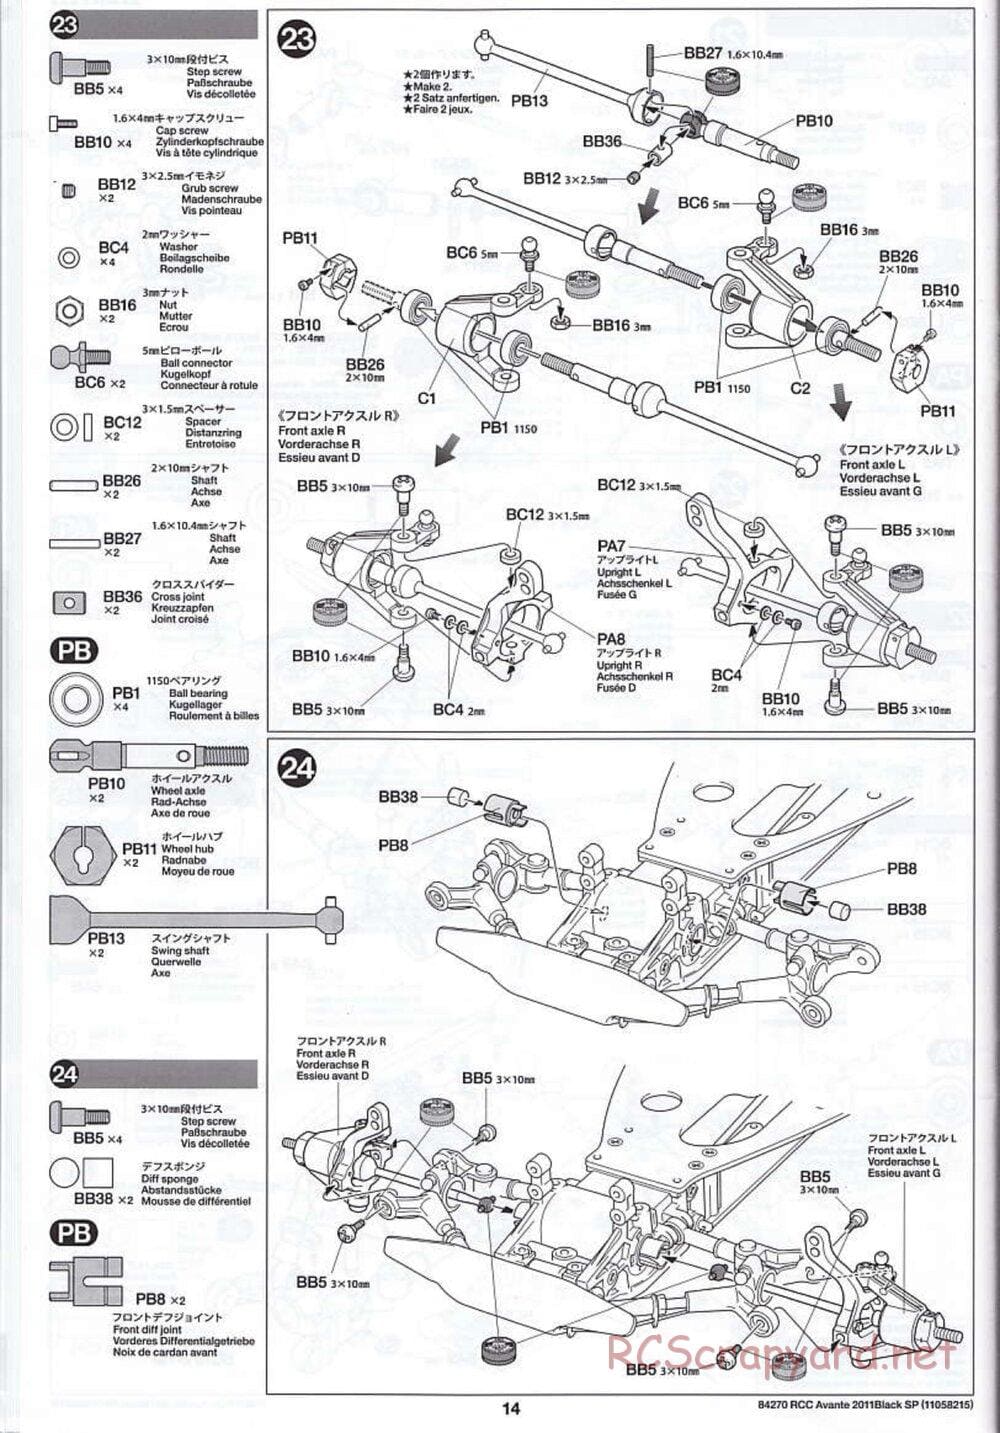 Tamiya - Avante 2011 - Black Special Chassis - Manual - Page 14